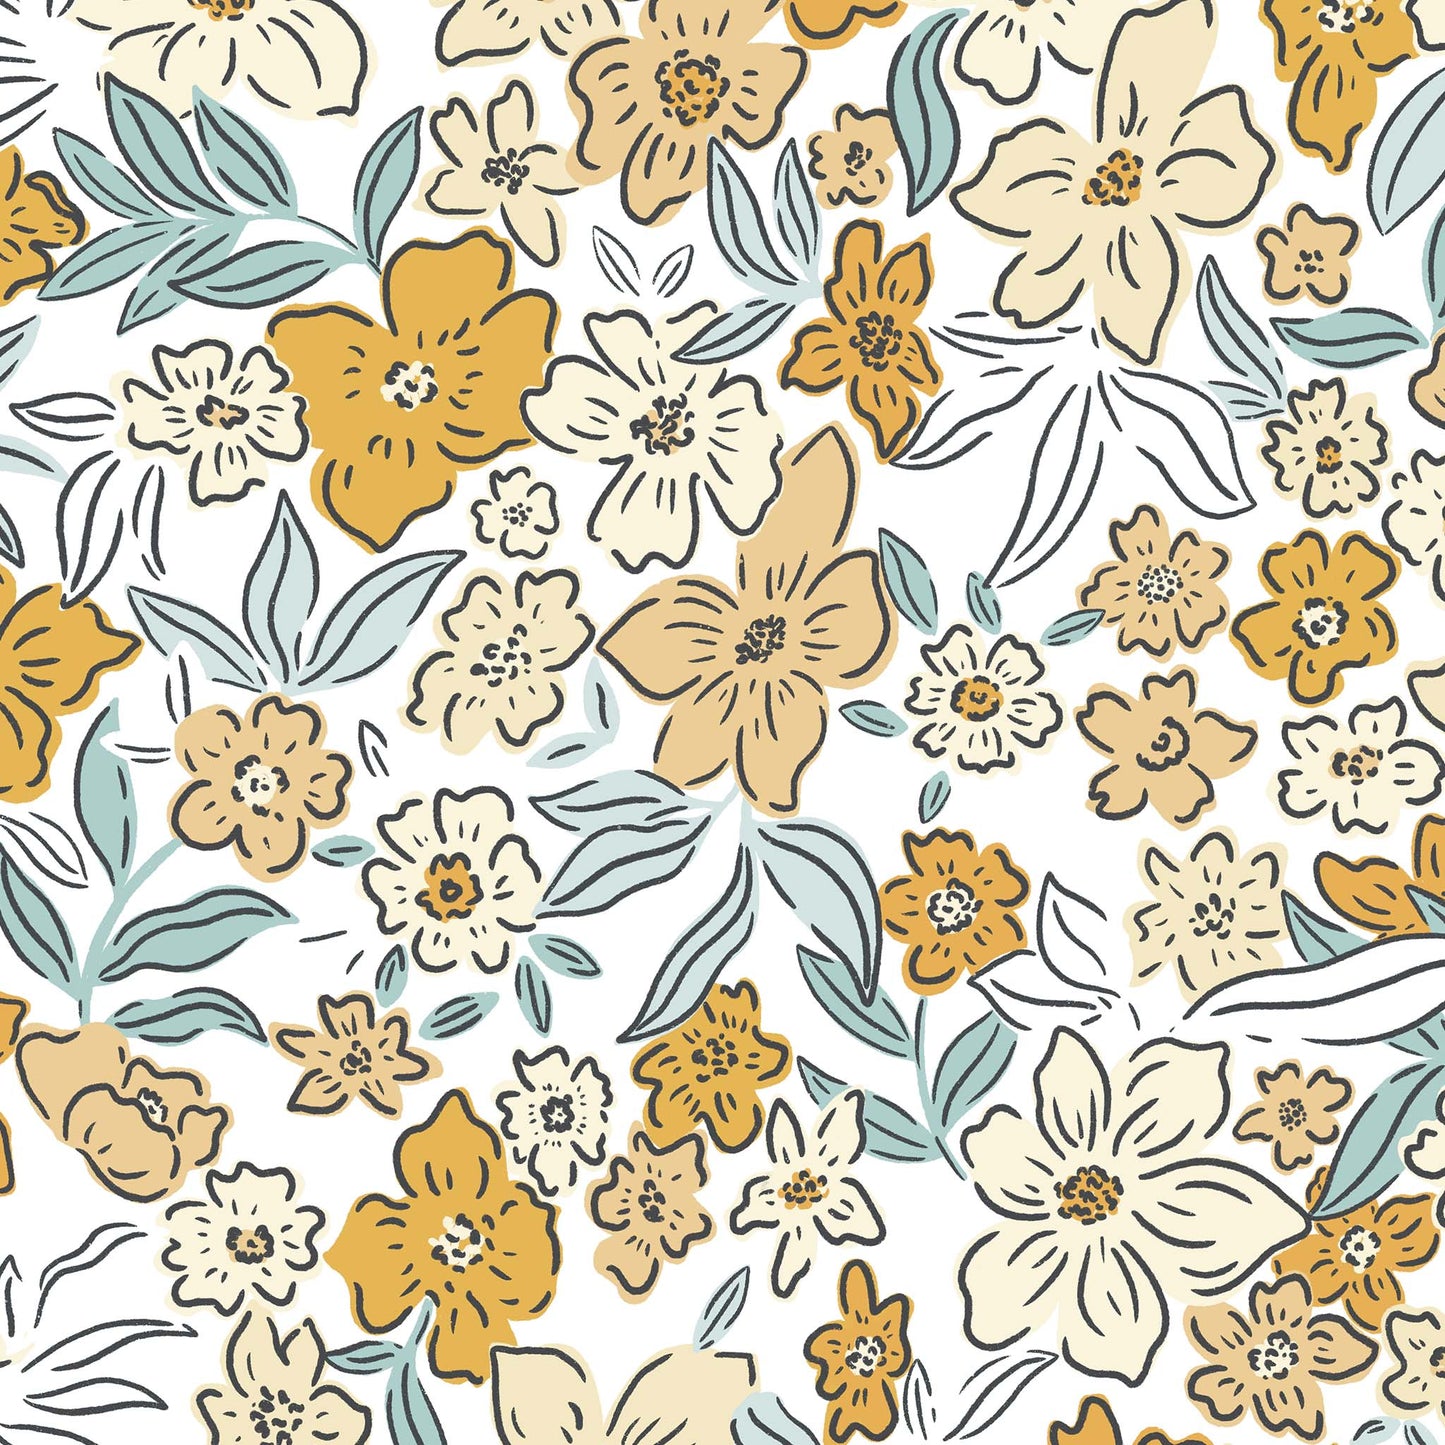 Introducing our Sweet Meadow Wallpaper in Sunshine Yellow, featuring a charming array of vibrant botanicals and scattered flowers in a calming yellow hue shown in a zoomed in image.